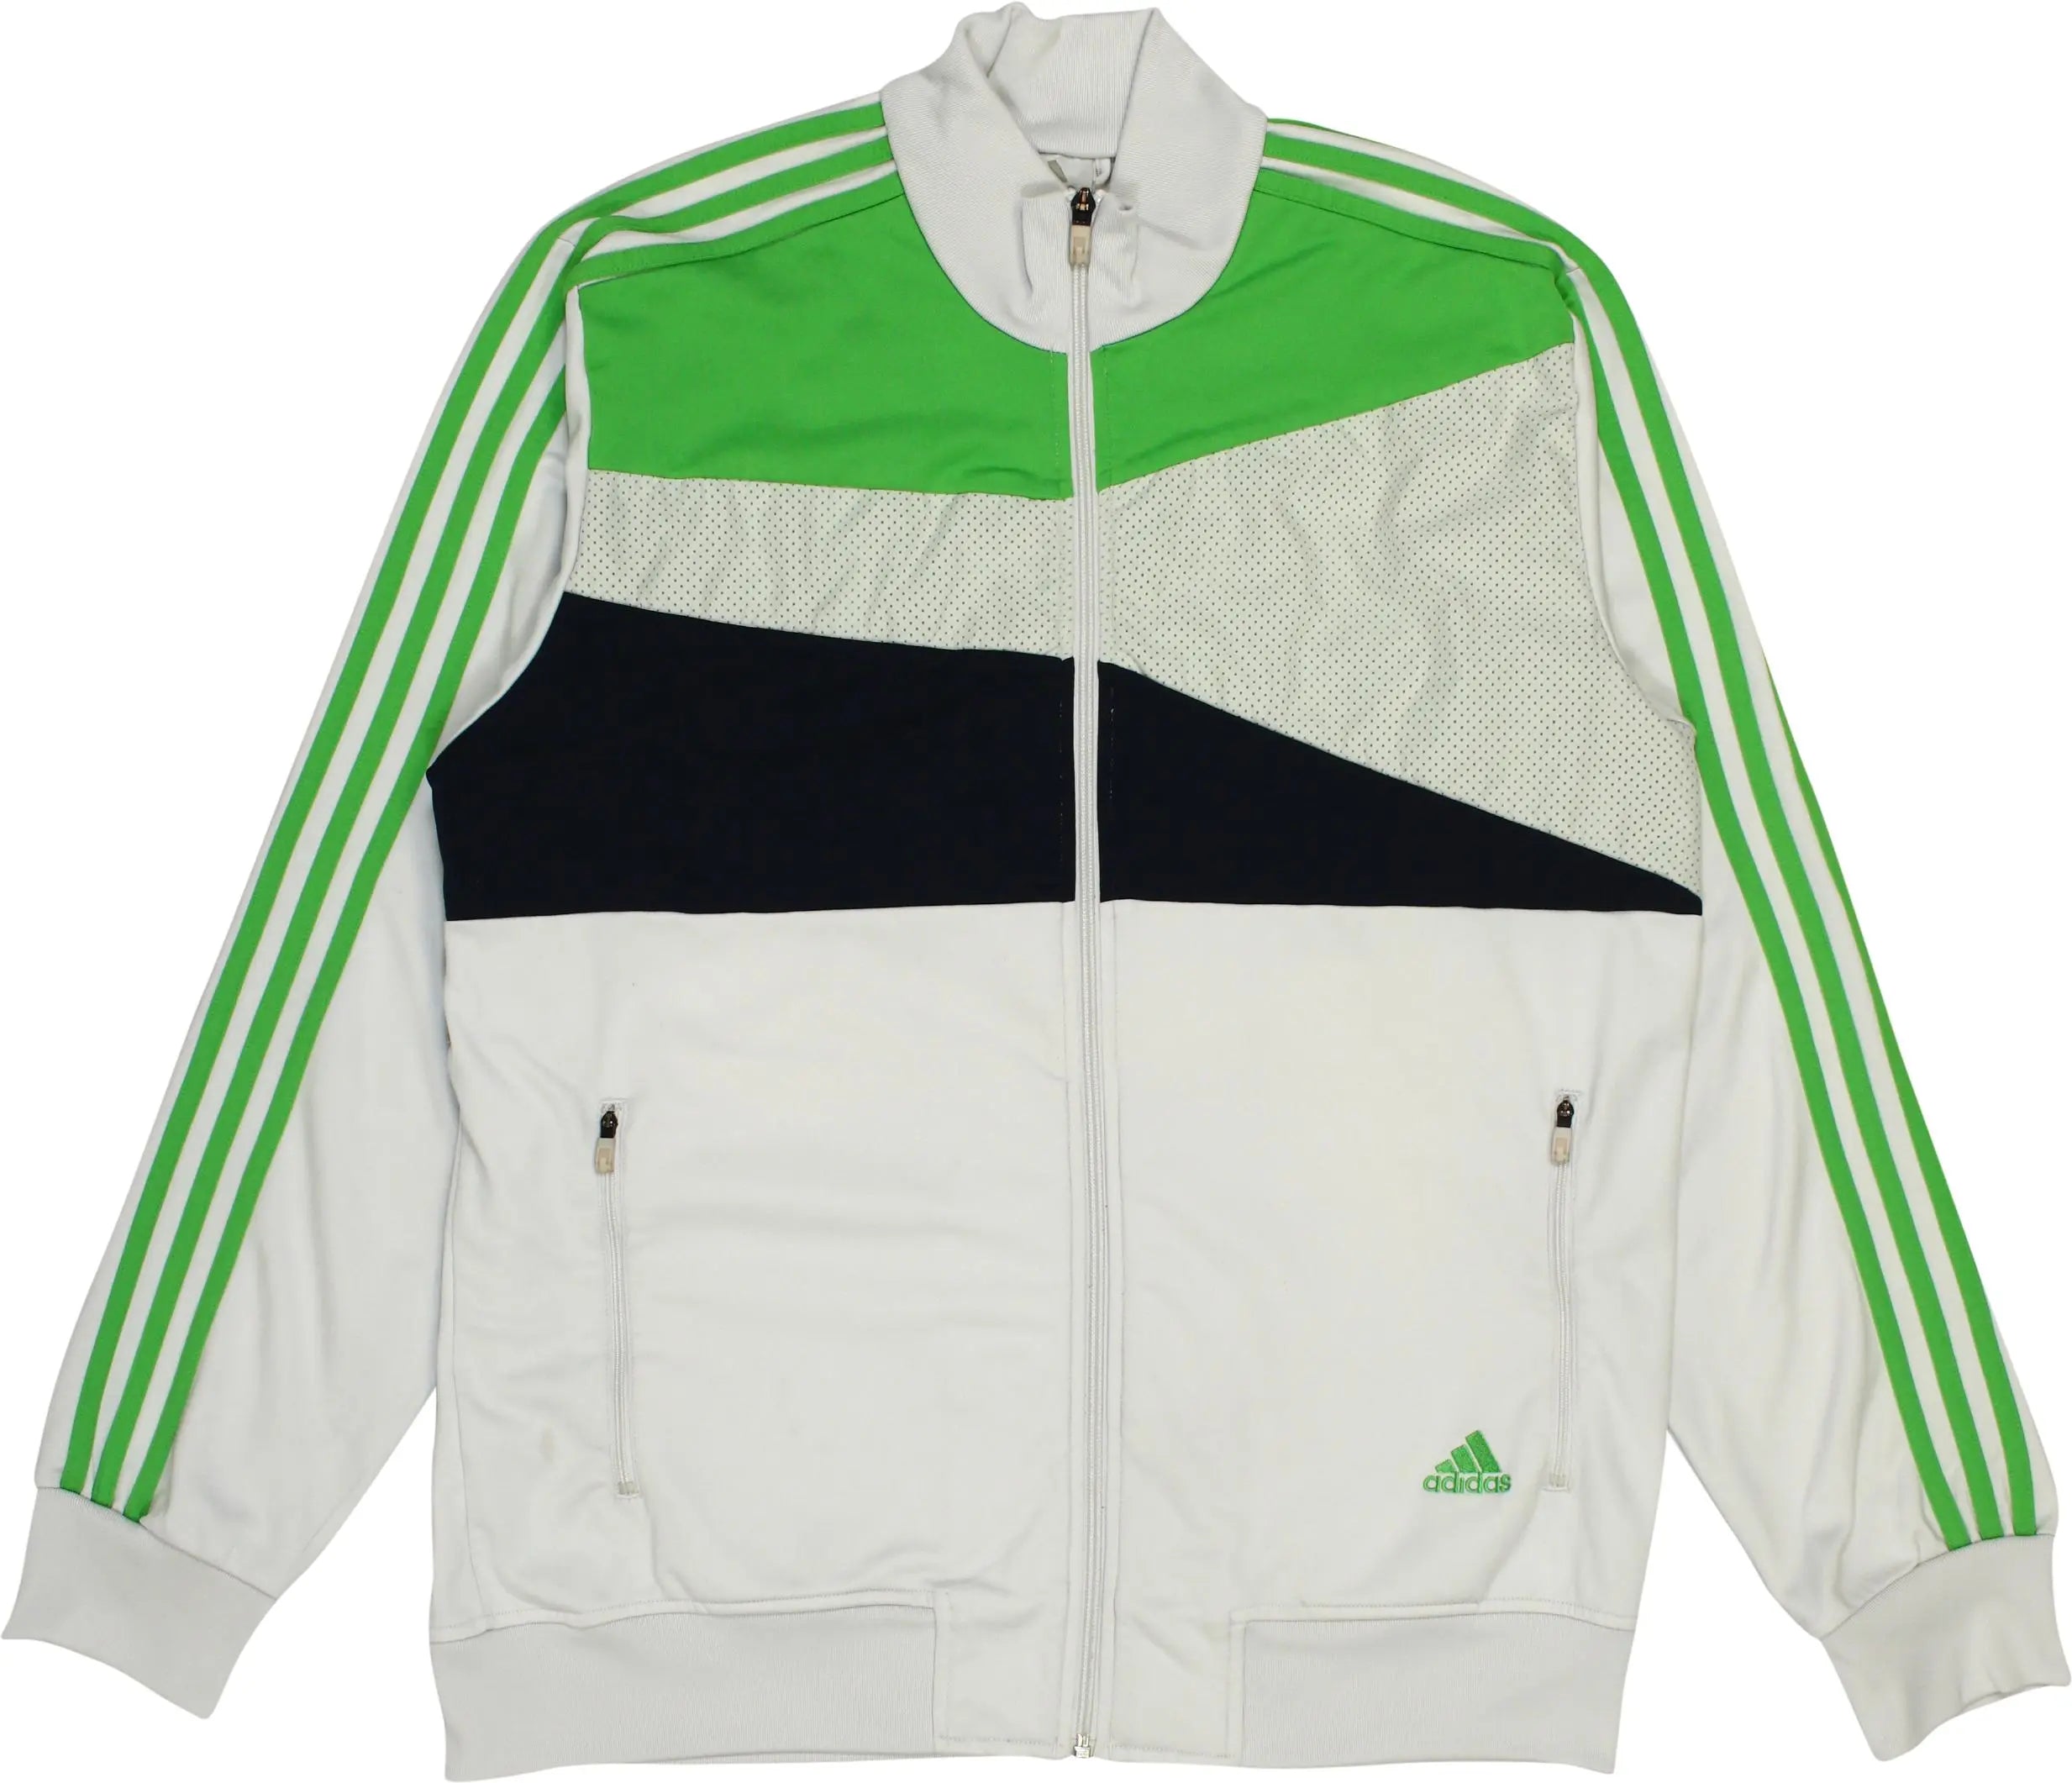 Adidas - Adidas Track Jacket- ThriftTale.com - Vintage and second handclothing